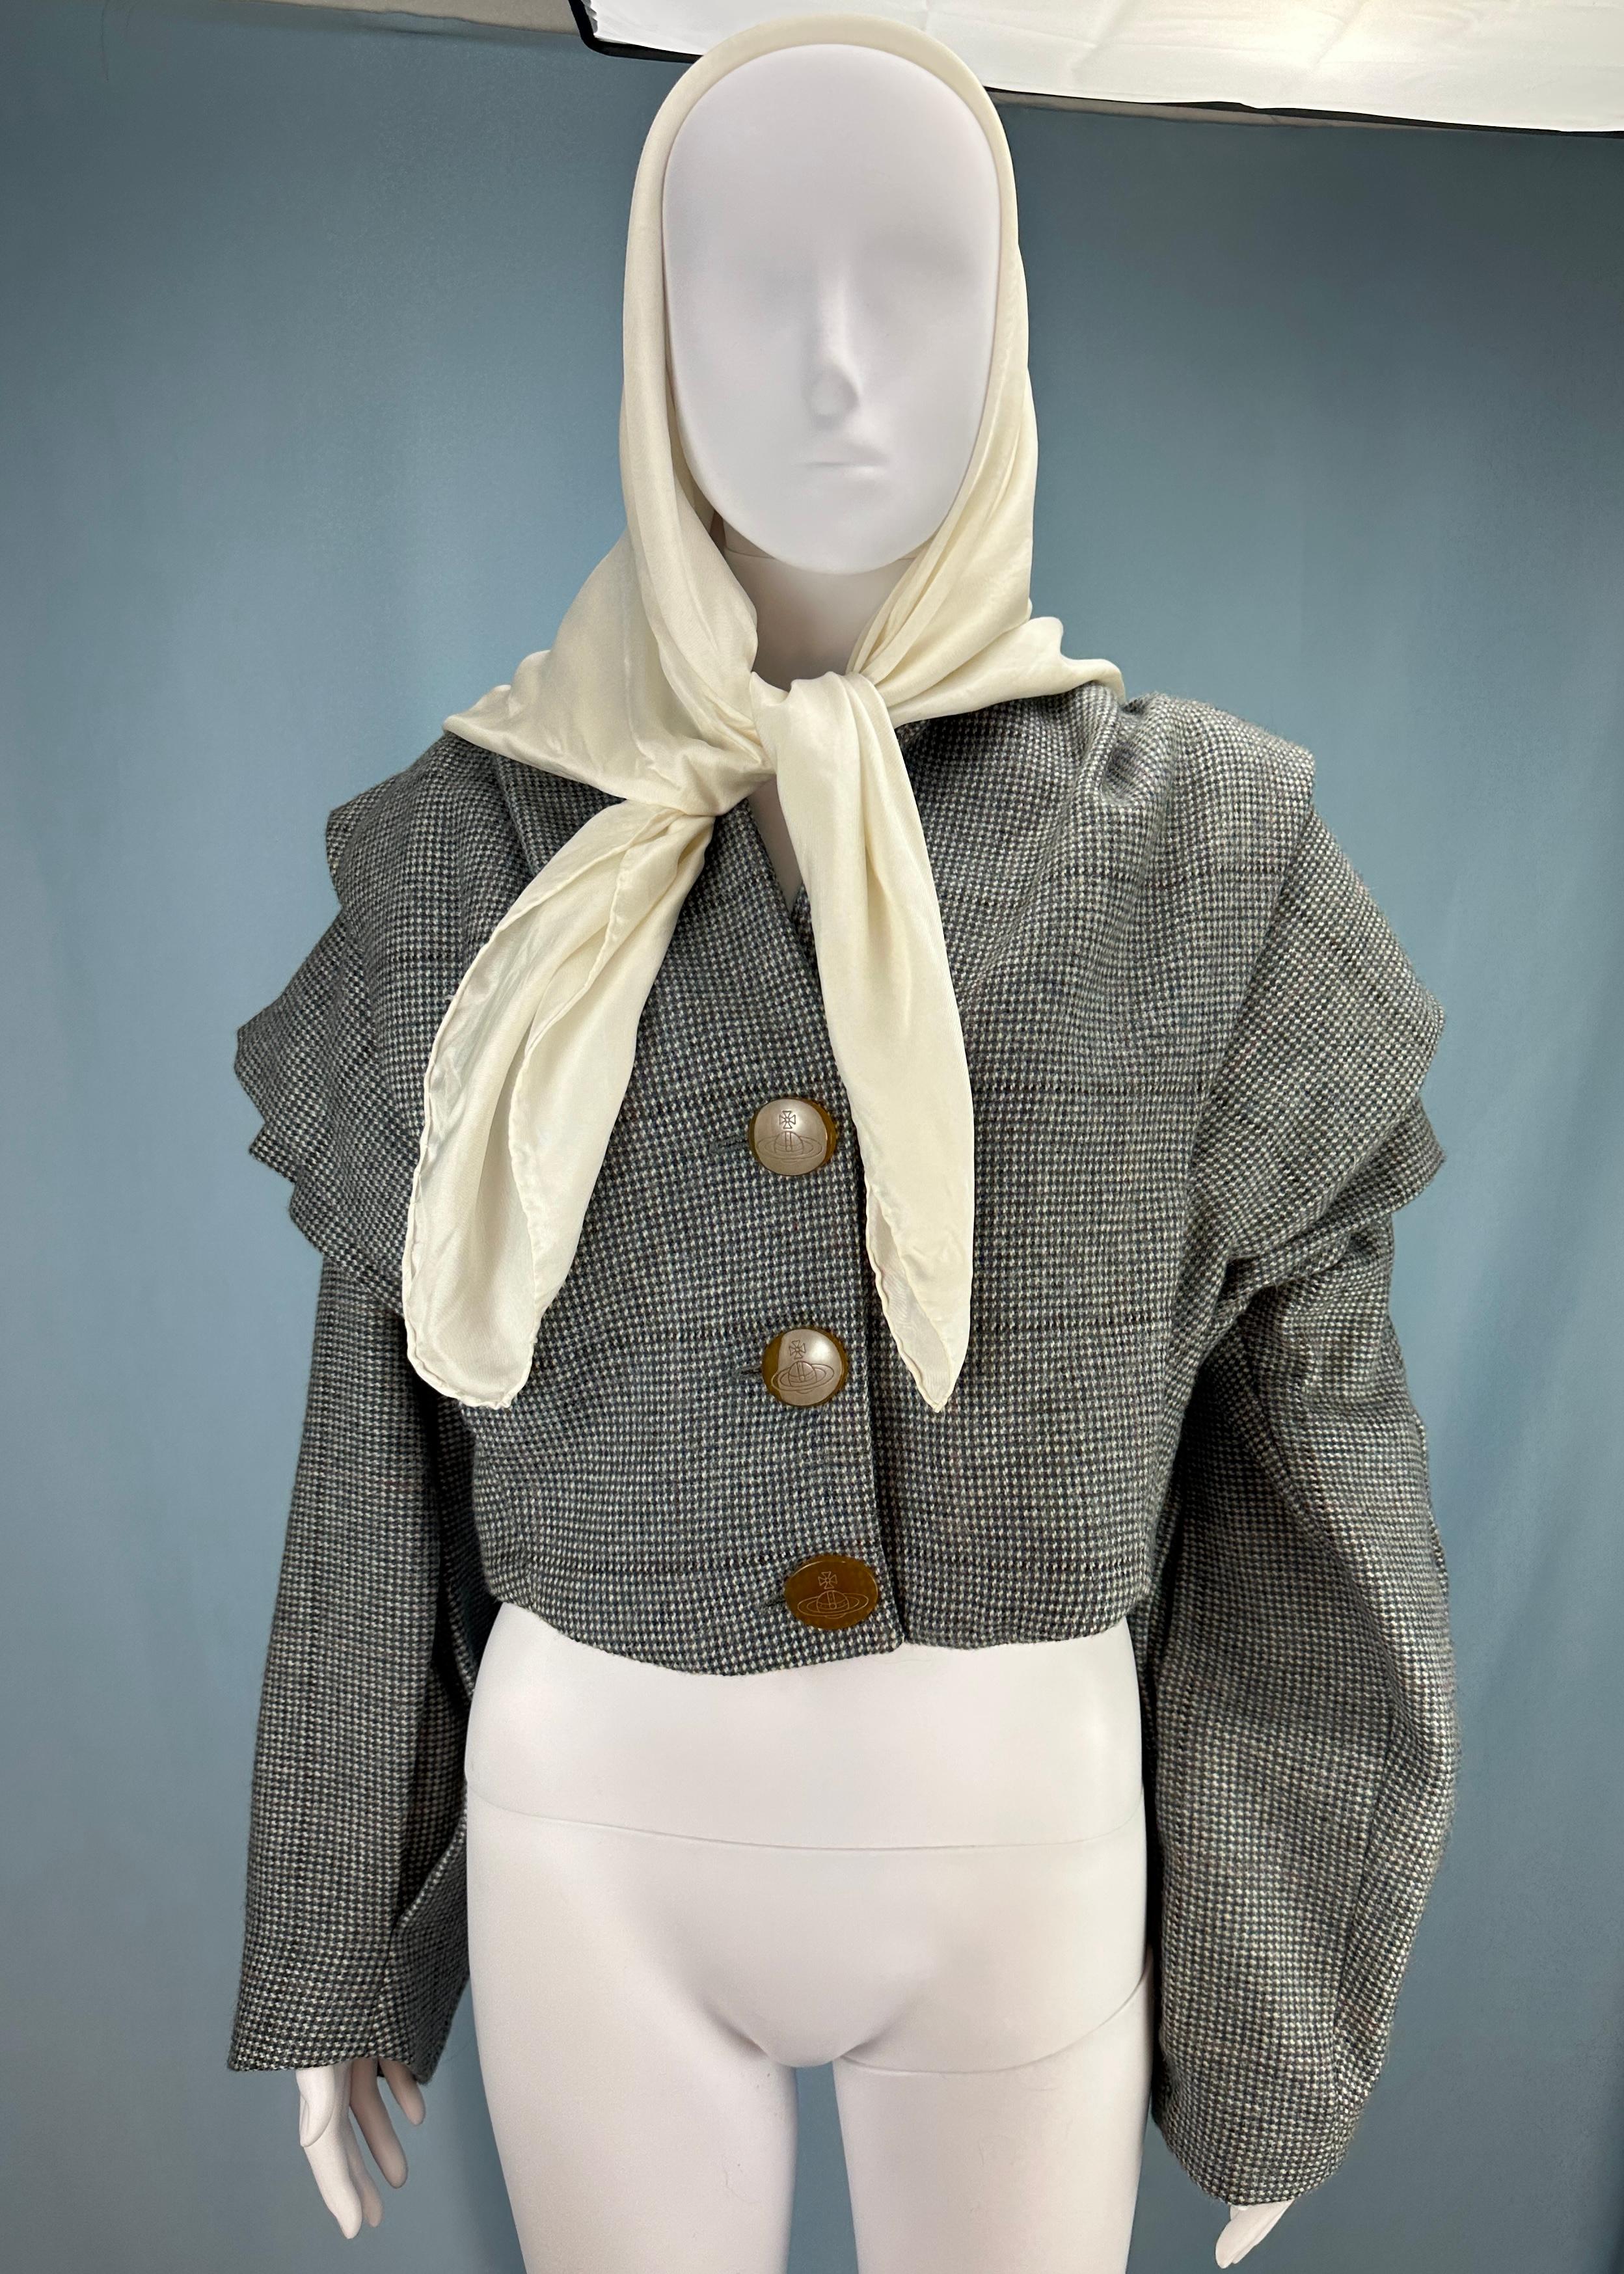 Vintage Vivienne Westwood

Fall 1992 “Always on Camera” collection 
Runway piece - this is the exact jacket that was worn on the Fall 1992 runway, the scarf is also presumed to also be the runway sample piece. 

Grey wool tweed “armour” jacket & dog